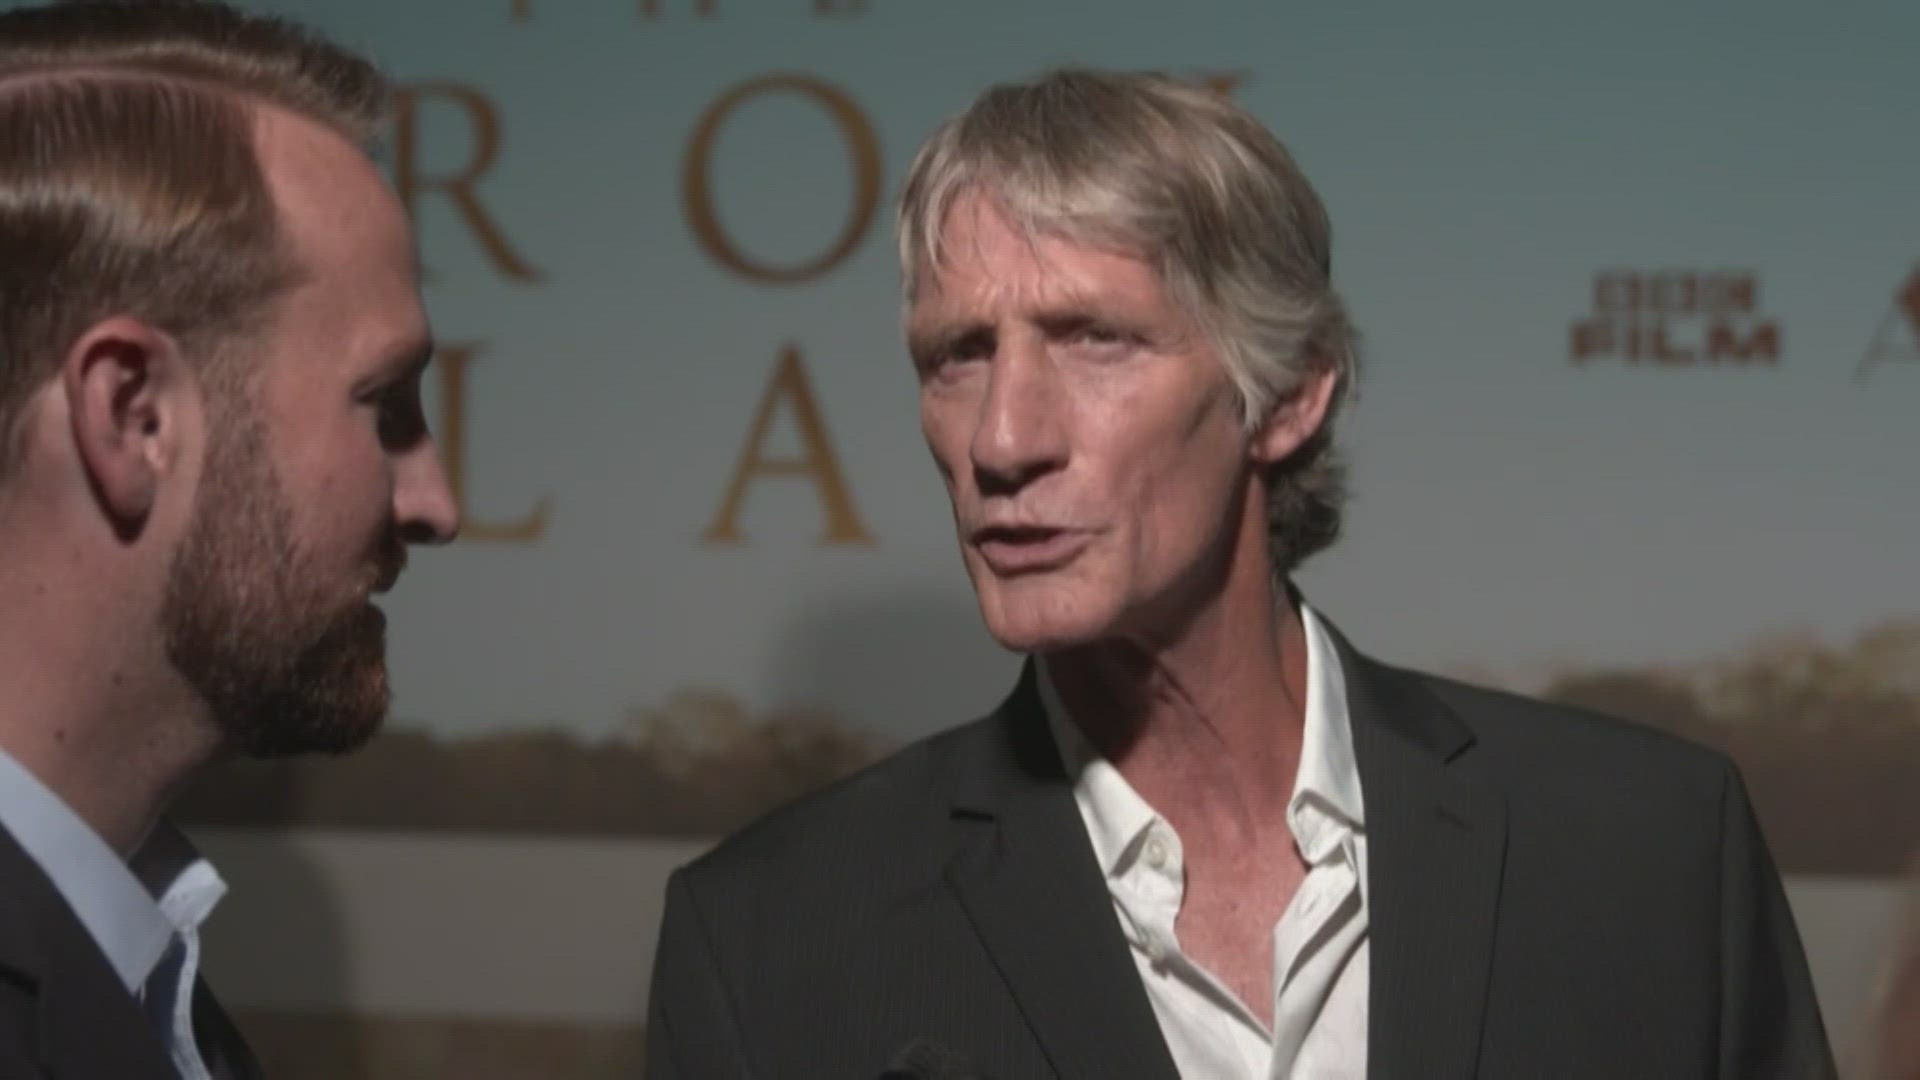 The biopic, put together by A24 Films, focuses on the Von Erichs, their wrestling fame, and the dark side of the ring that only Kevin Von Erich survived.